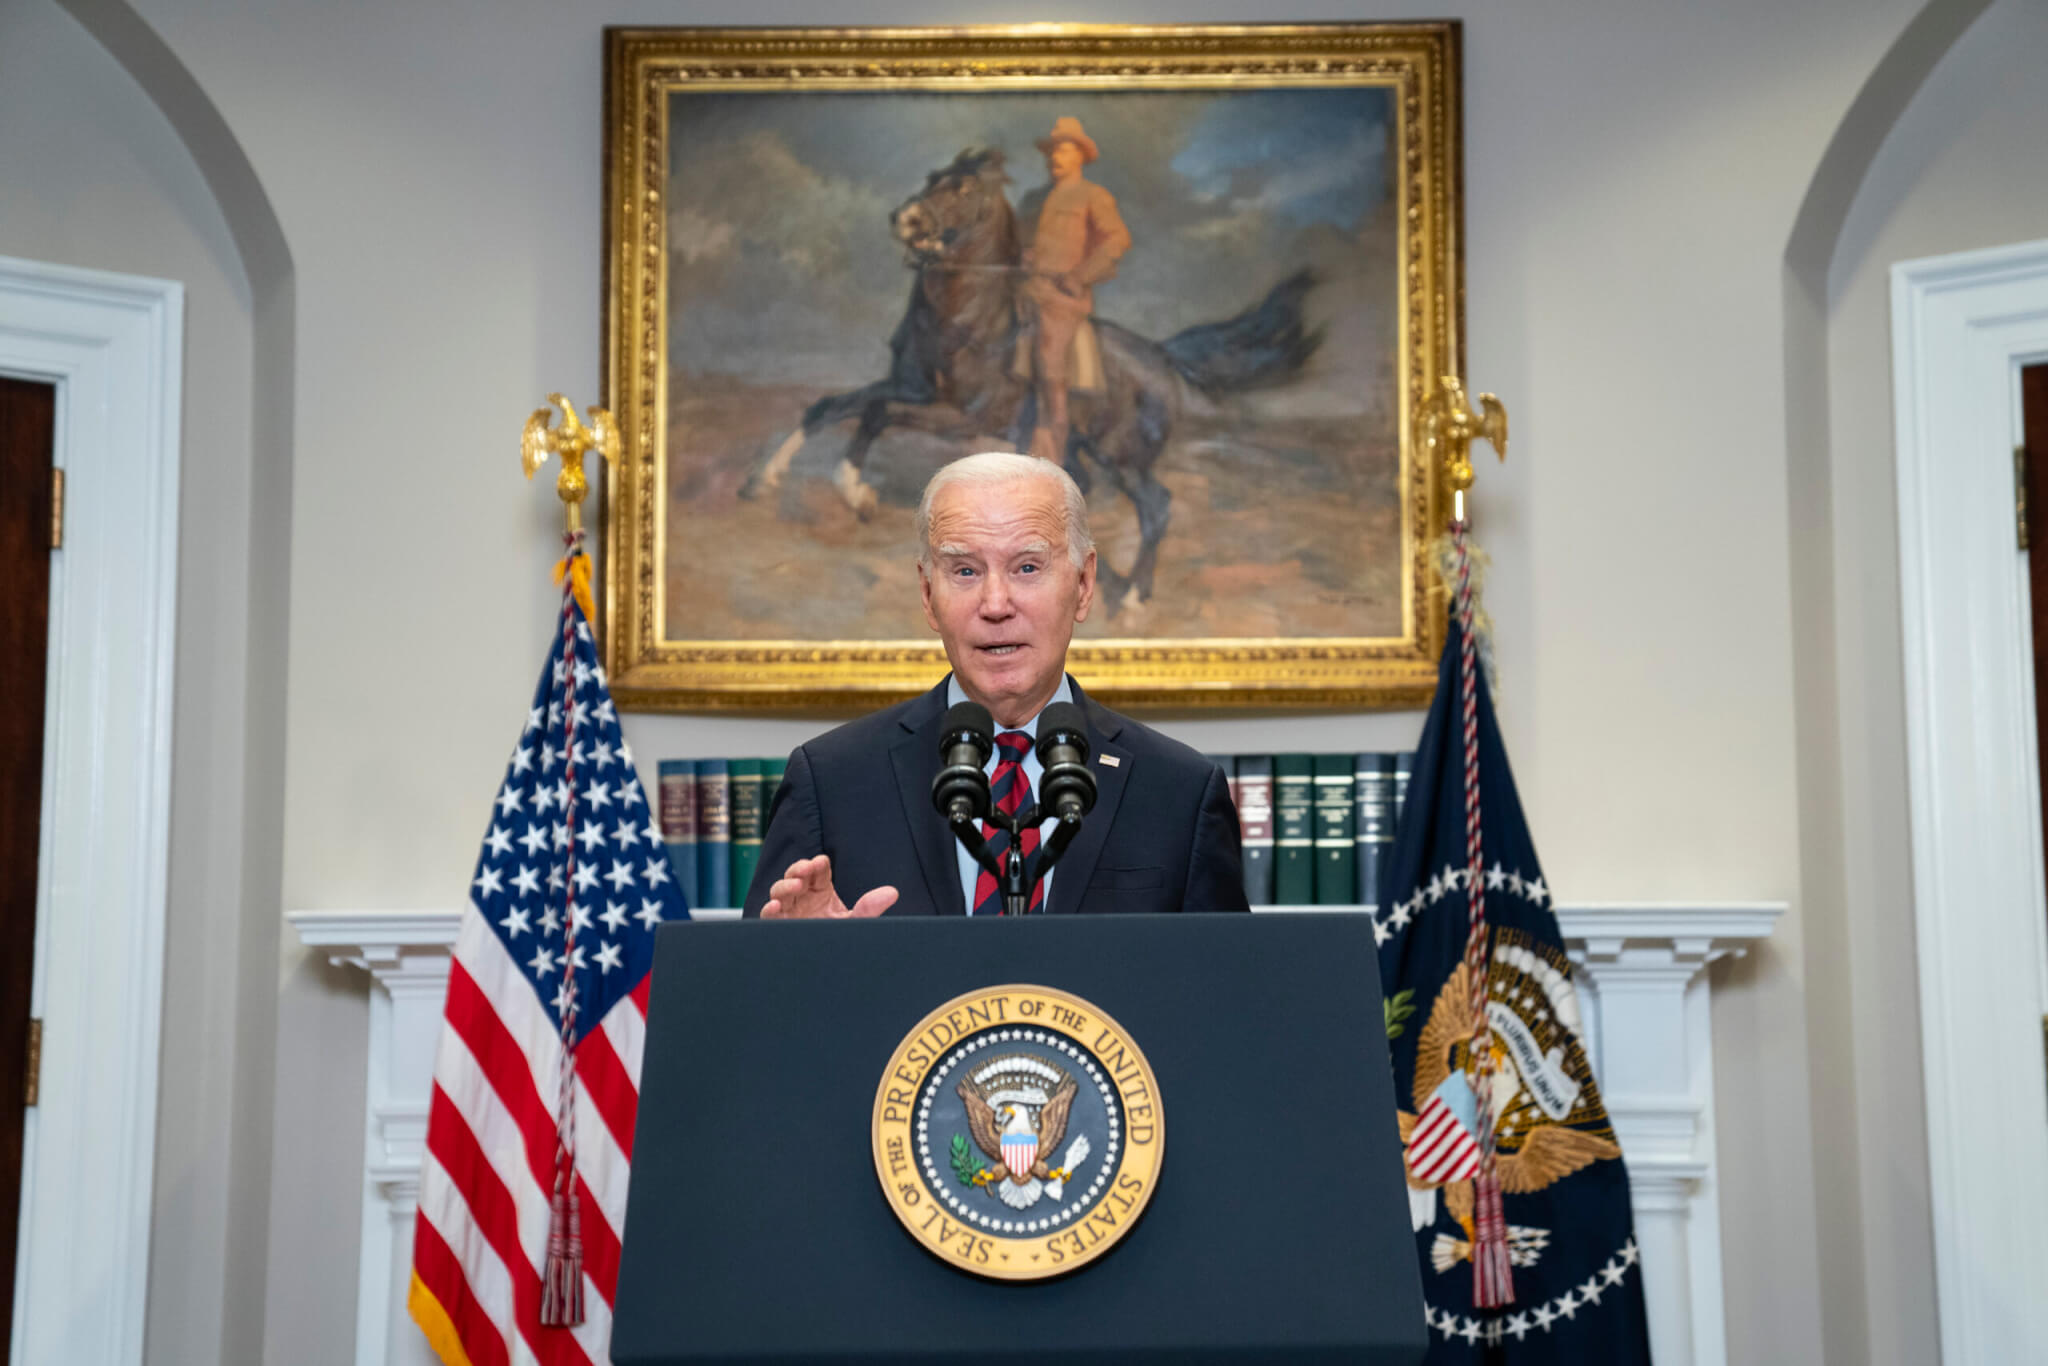 President Joe Biden delivers remarks on student loan debt forgiveness, in the Roosevelt Room of the White House